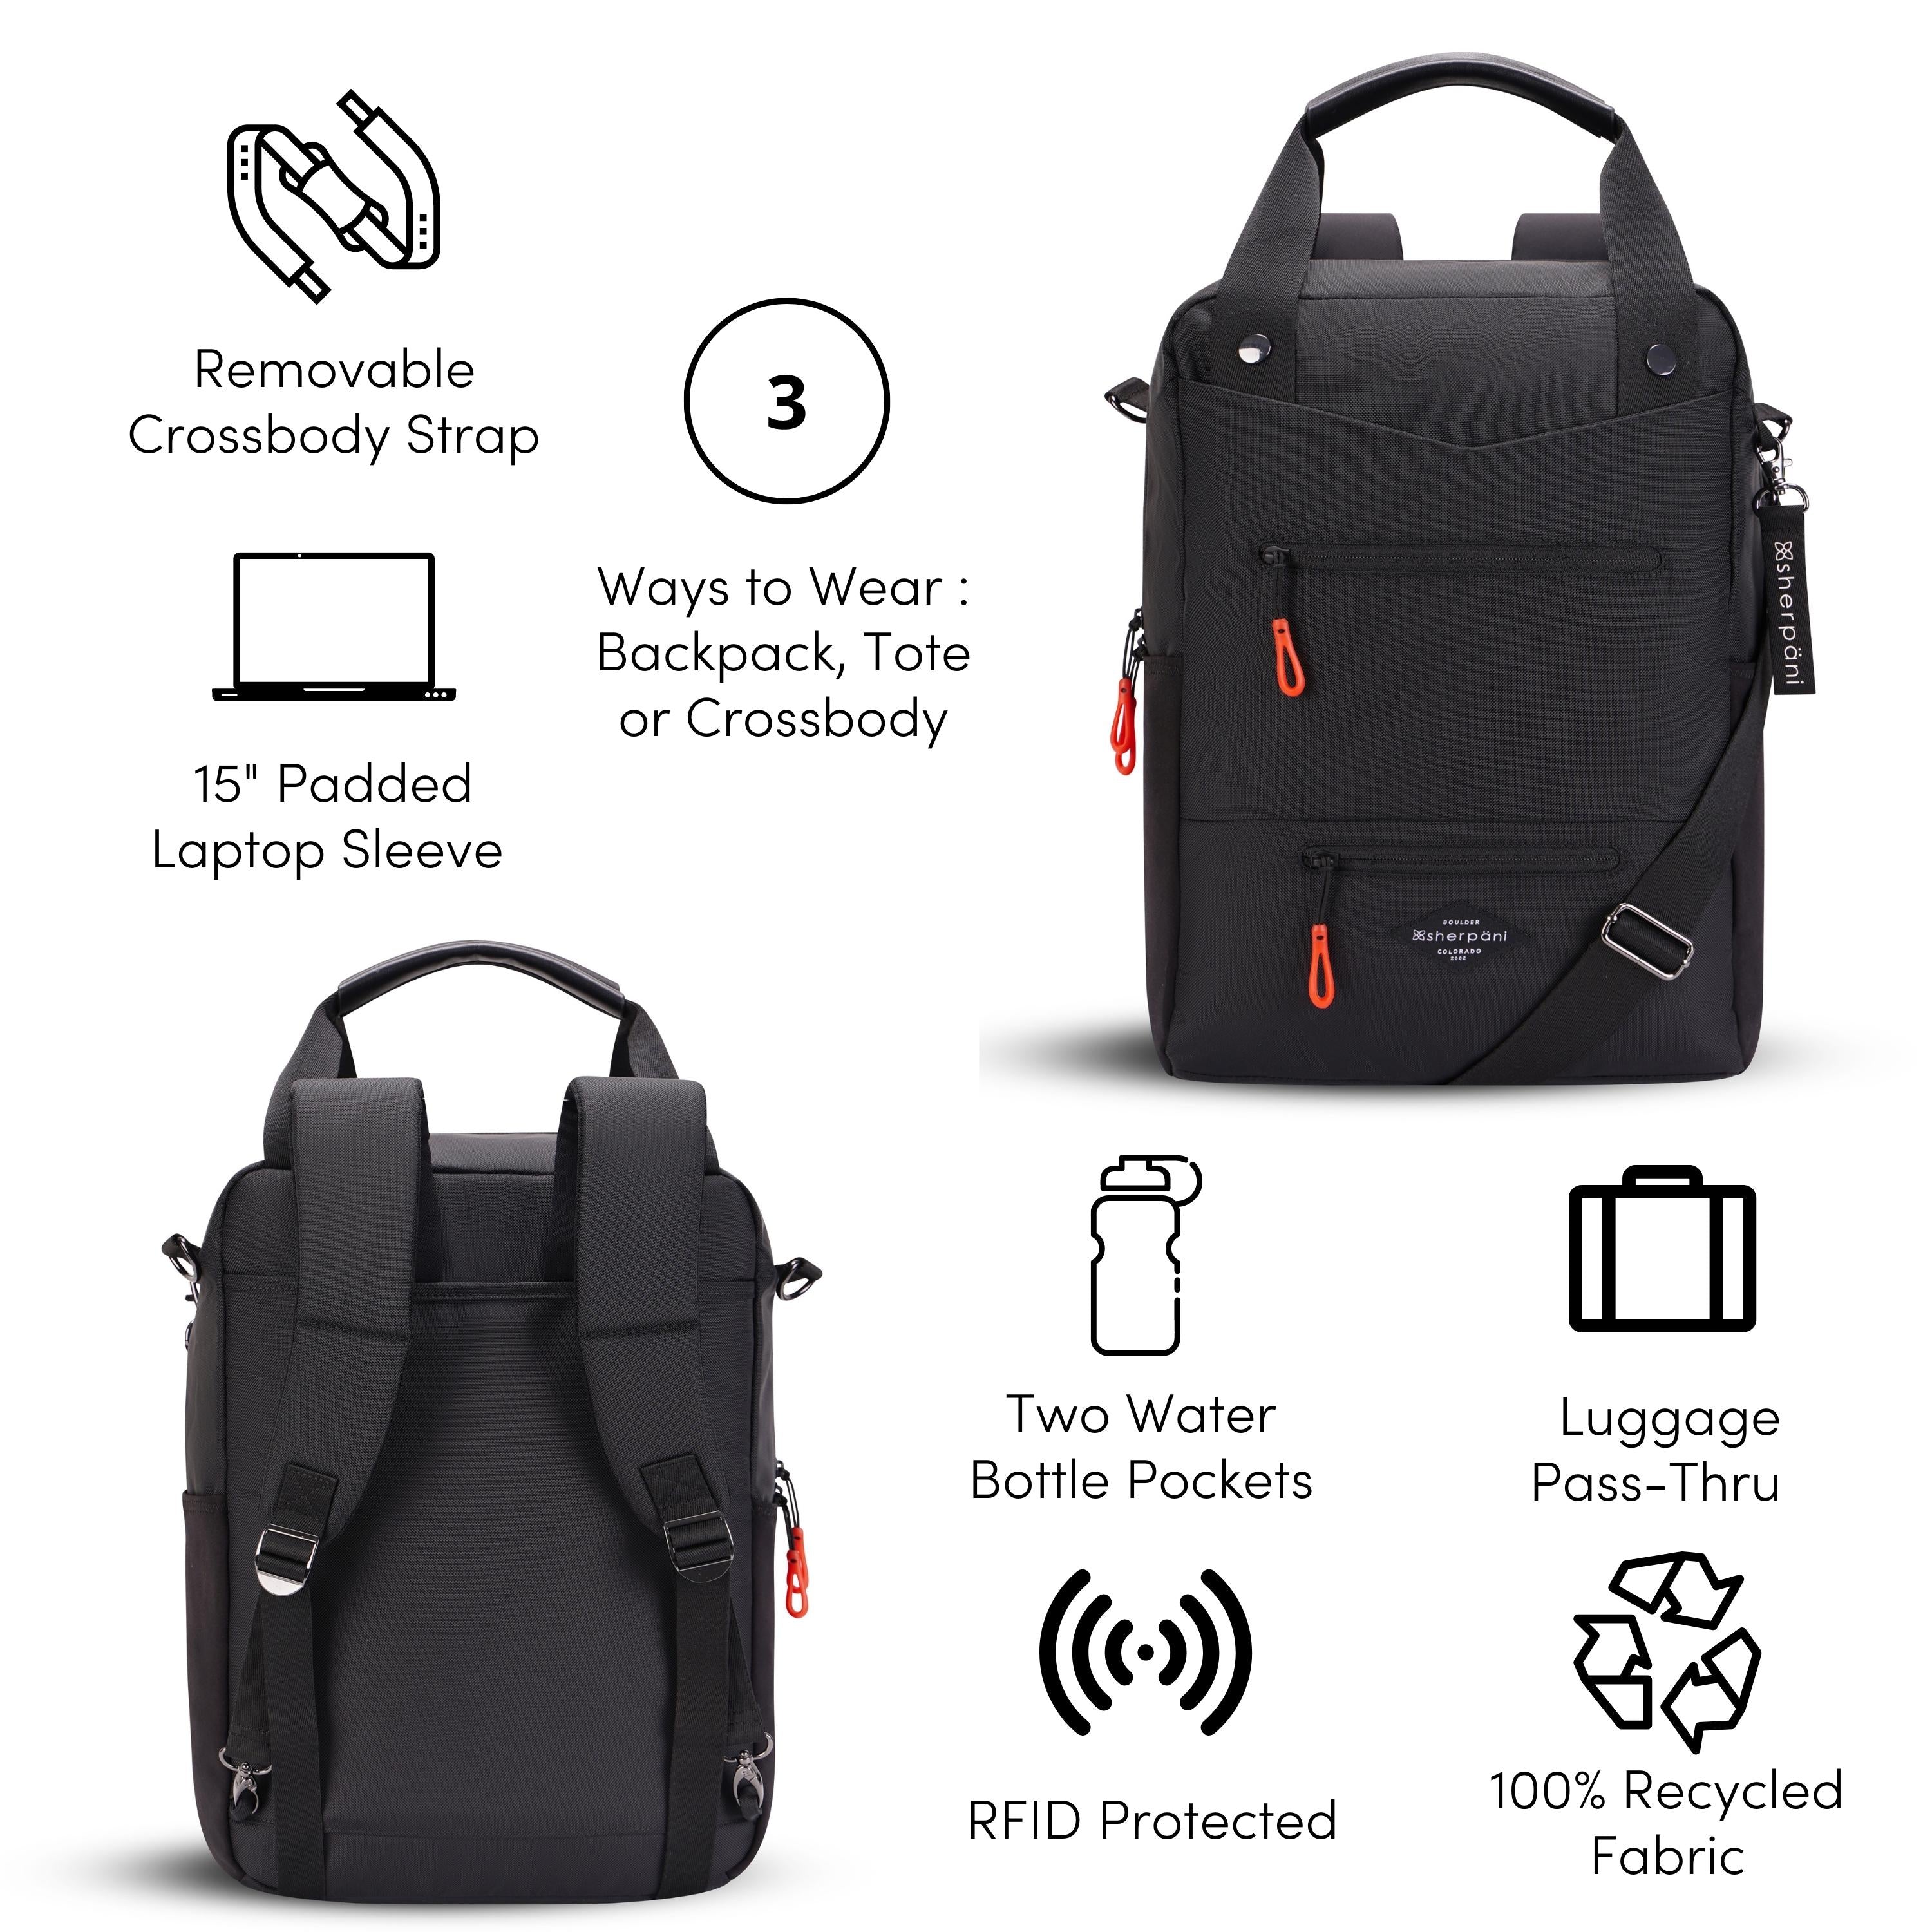 A Graphic showing the features of Sherpani’s three in one bag, the Camden in Raven. There is a front and back view of the bag. The following features are highlighted with corresponding graphics: Removable Crossbody Strap, 15" Padded Laptop Sleeve, Three Ways to Wear: Backpack, Tote or Crossbody, Two Water Bottle Pockets, RFID Protected, Luggage Pass Thru, 1% Recycled Fabric 